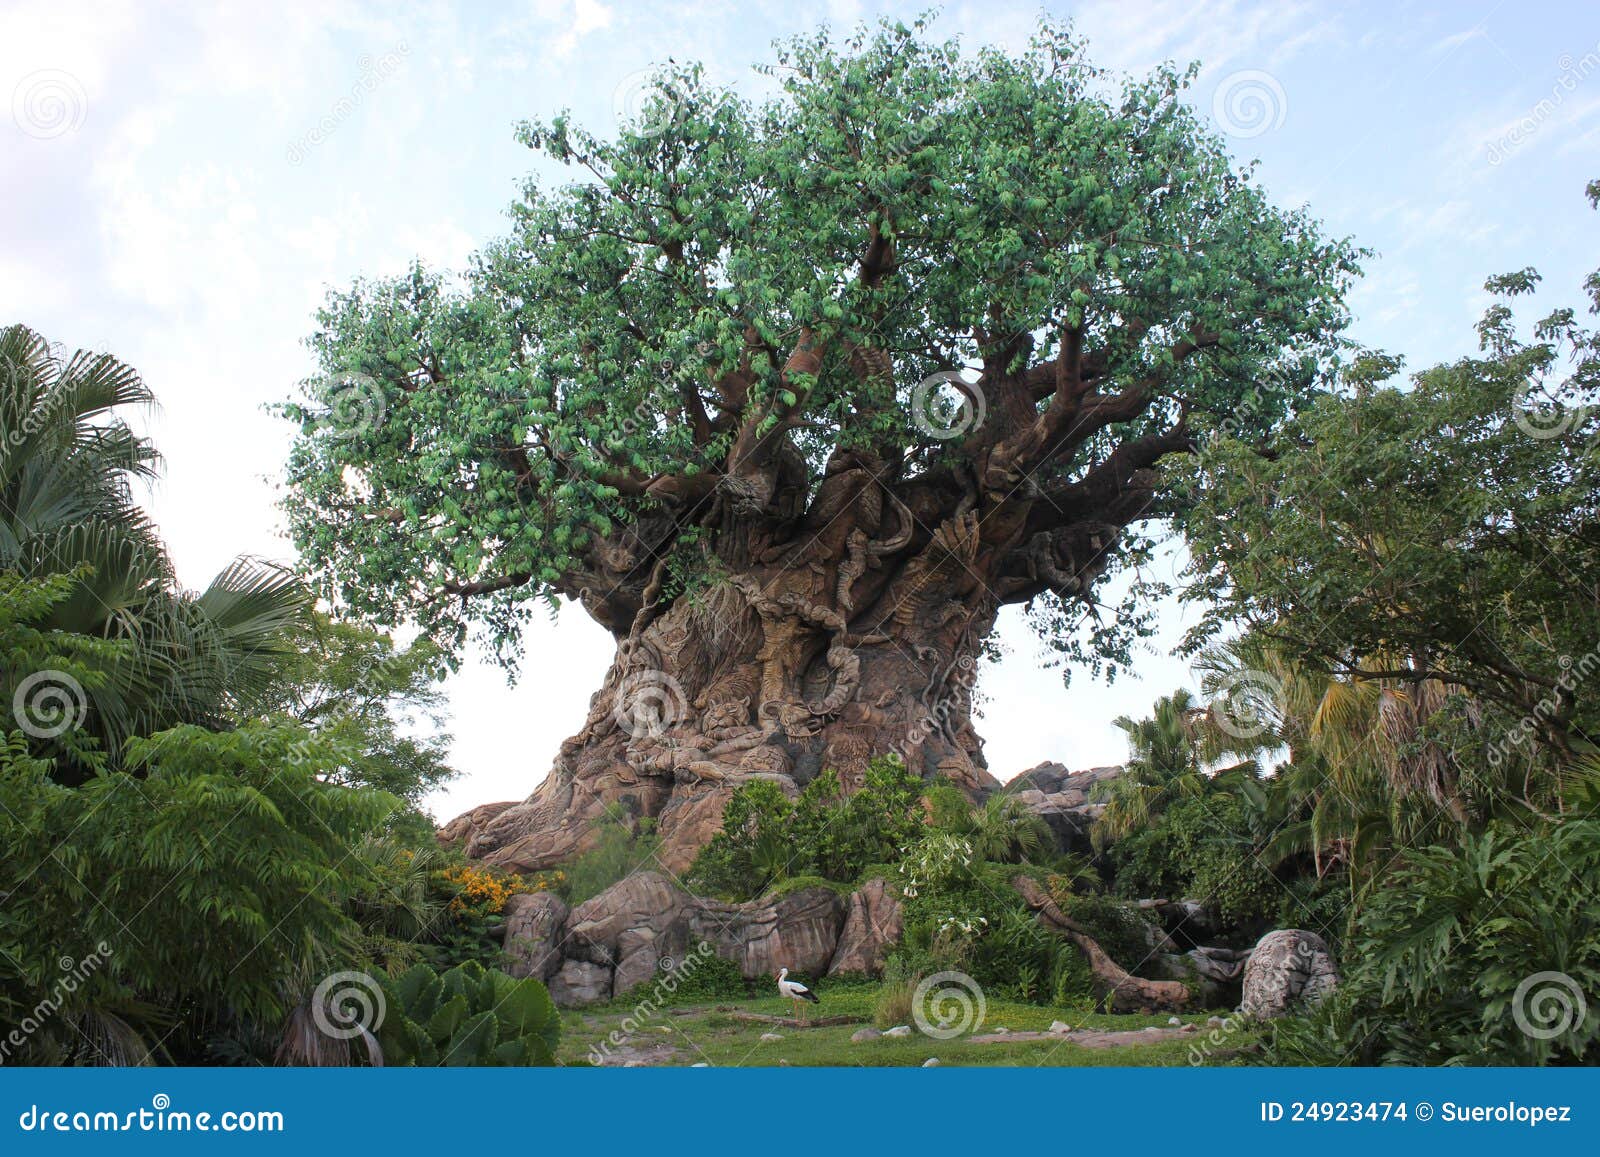 Download Tree Of Life With Carved Trunk In The Disneyworld ...